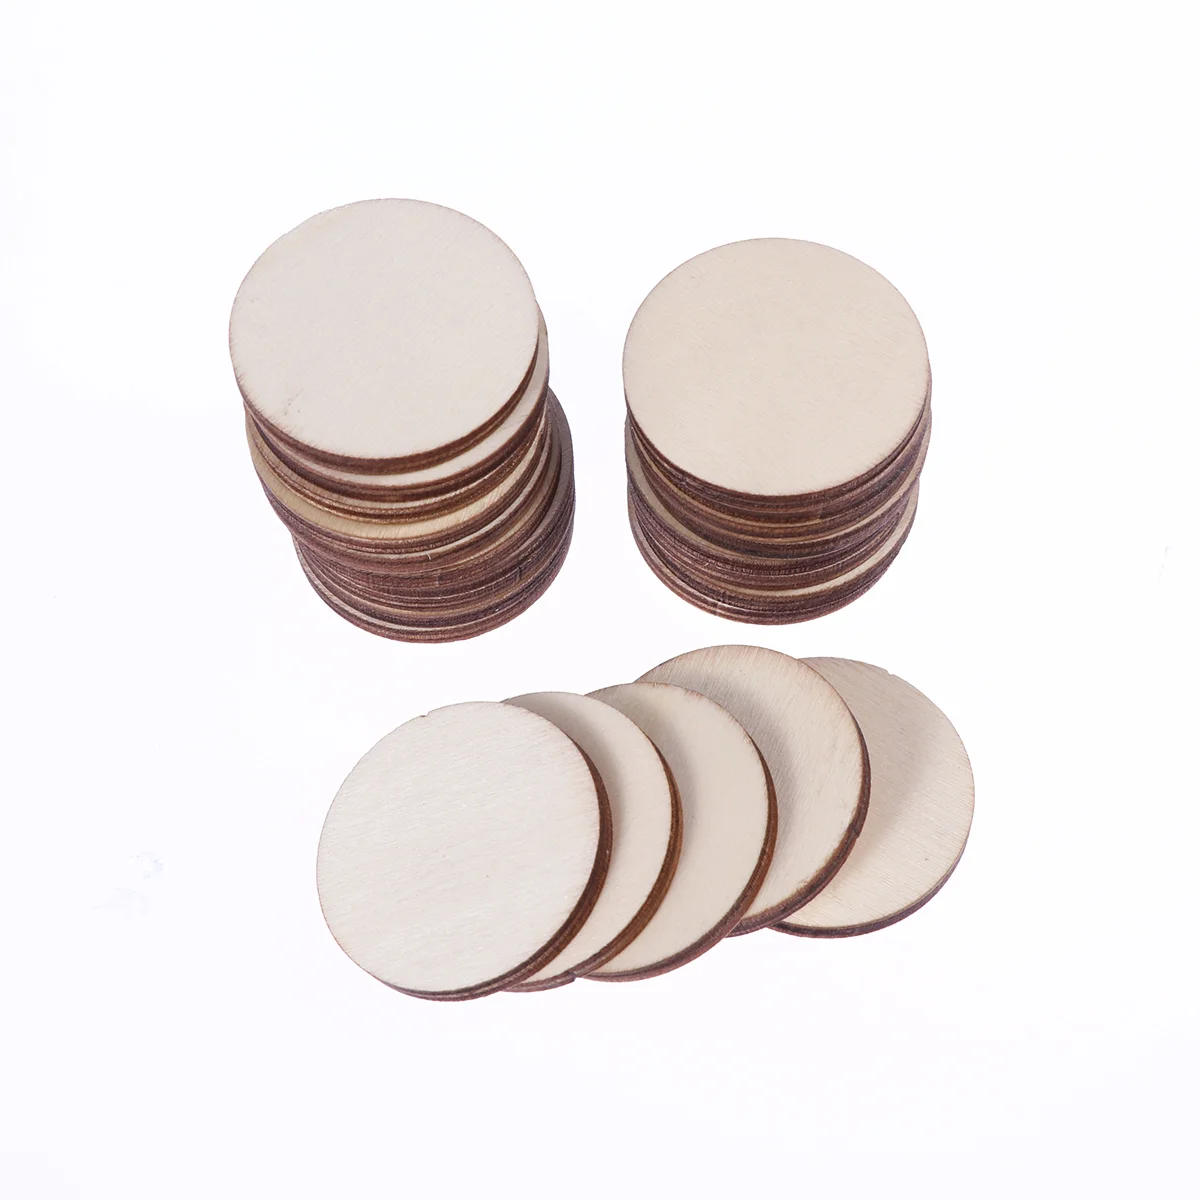 

Wood Wooden Round Pieces Unfinished Piece Craft Circles Blank Crafts Woods Slices Cutout Discs Slice Cutouts Diy Shapes